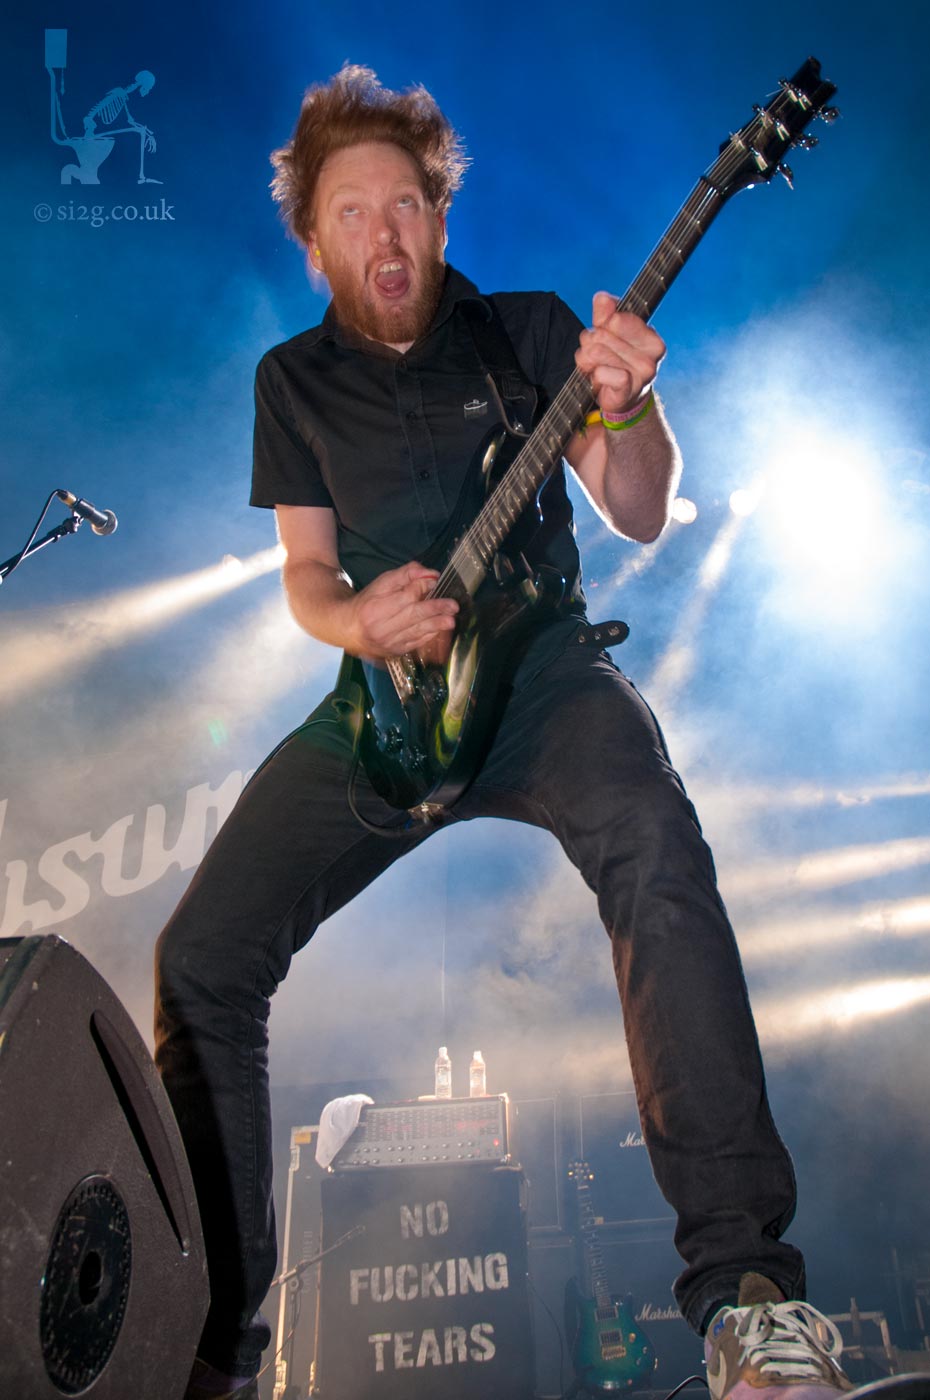 Johnny Truant - I love this shot of Reuben Gotto, guitarist of Johnny Truant playing at the Download festival back in 2008.